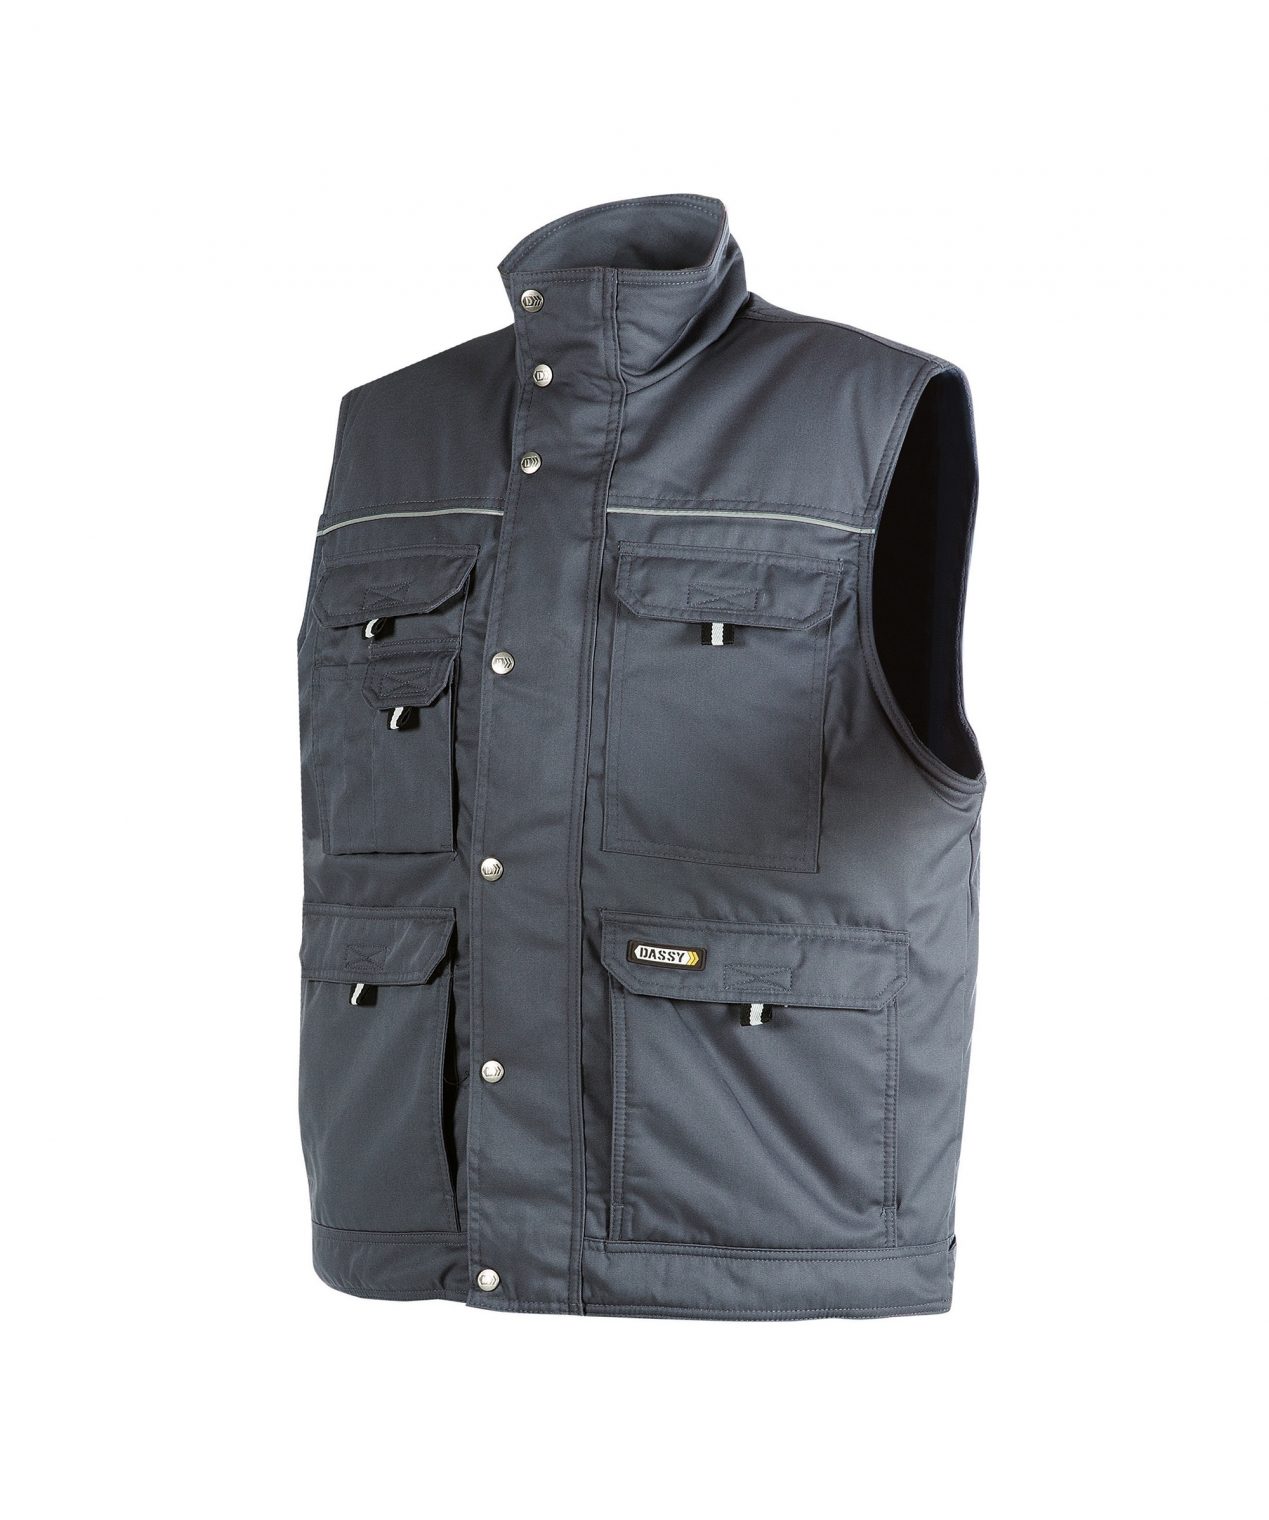 mons body warmer cement grey front